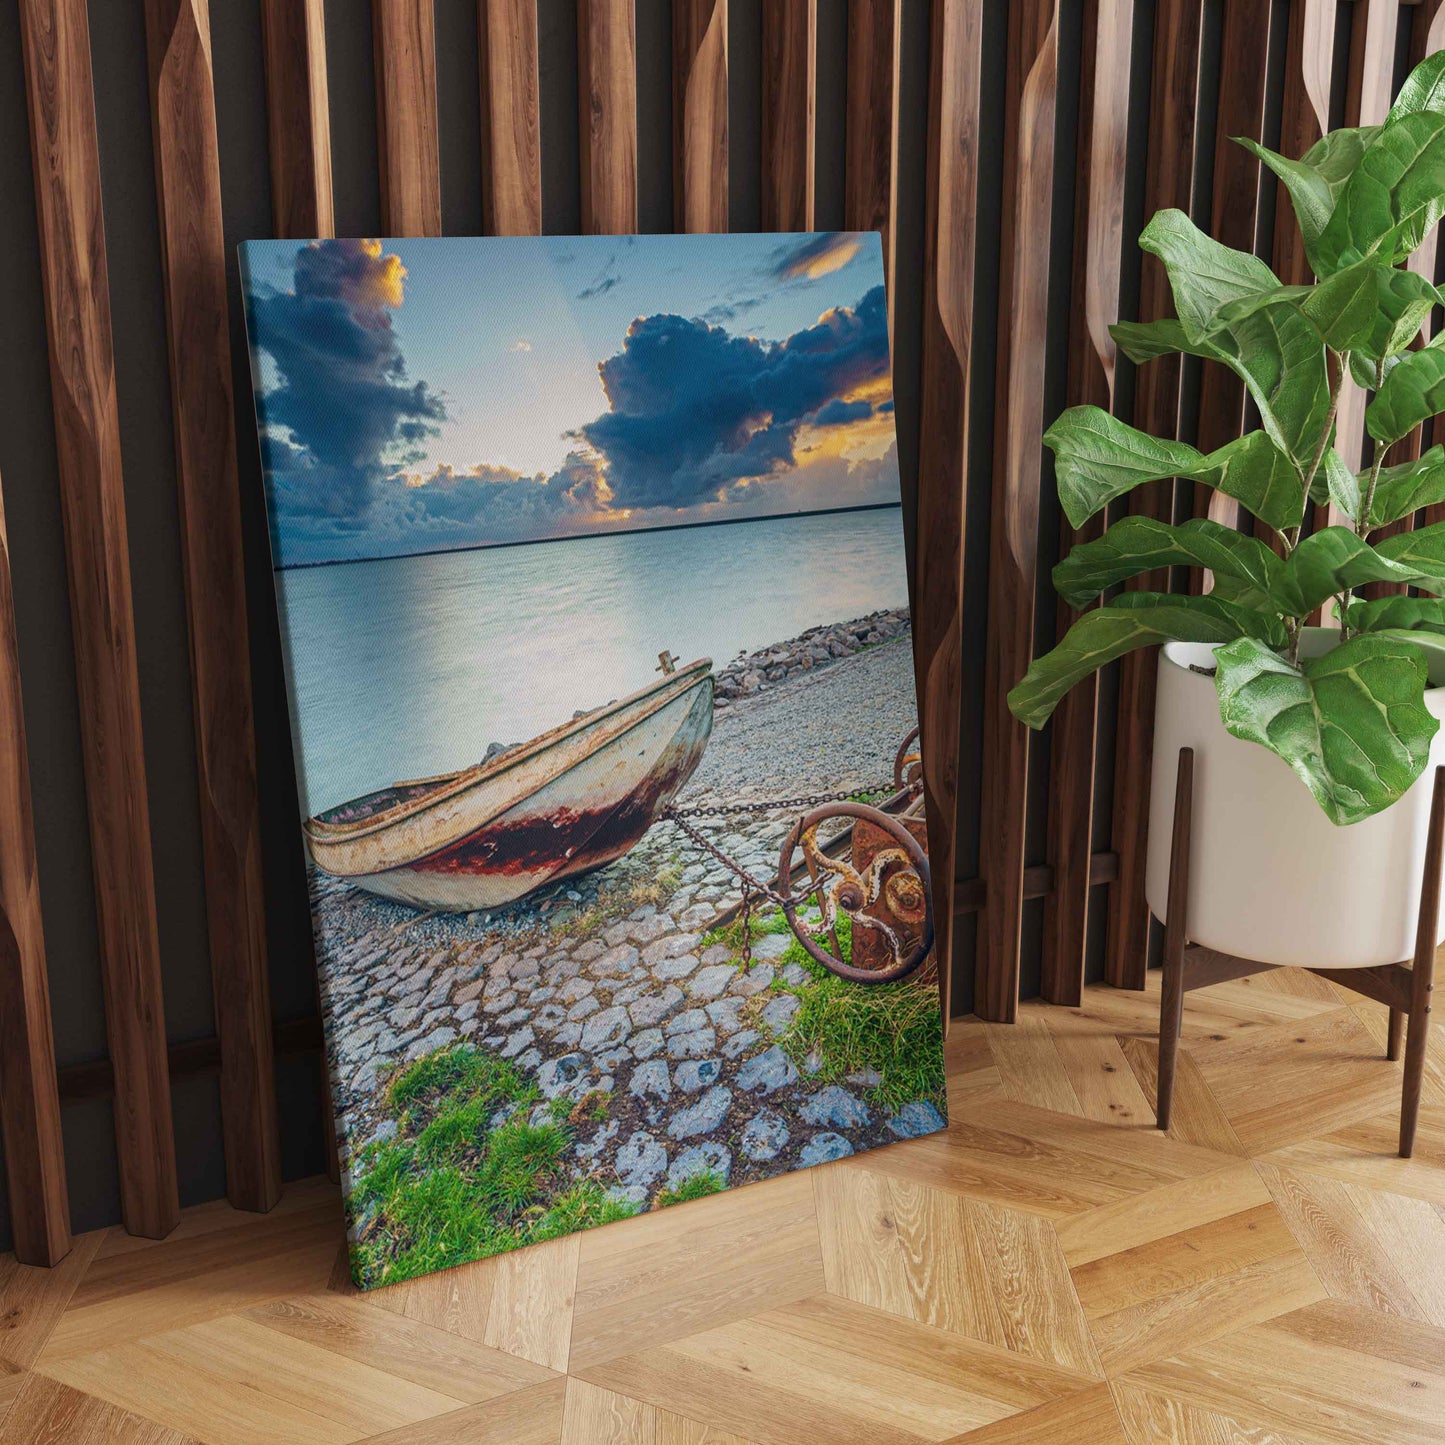 Serenity Shore: Tranquil Wall Art of a Boat by the Beach - Embrace the Calmness of Coastal Beauty - S05E43